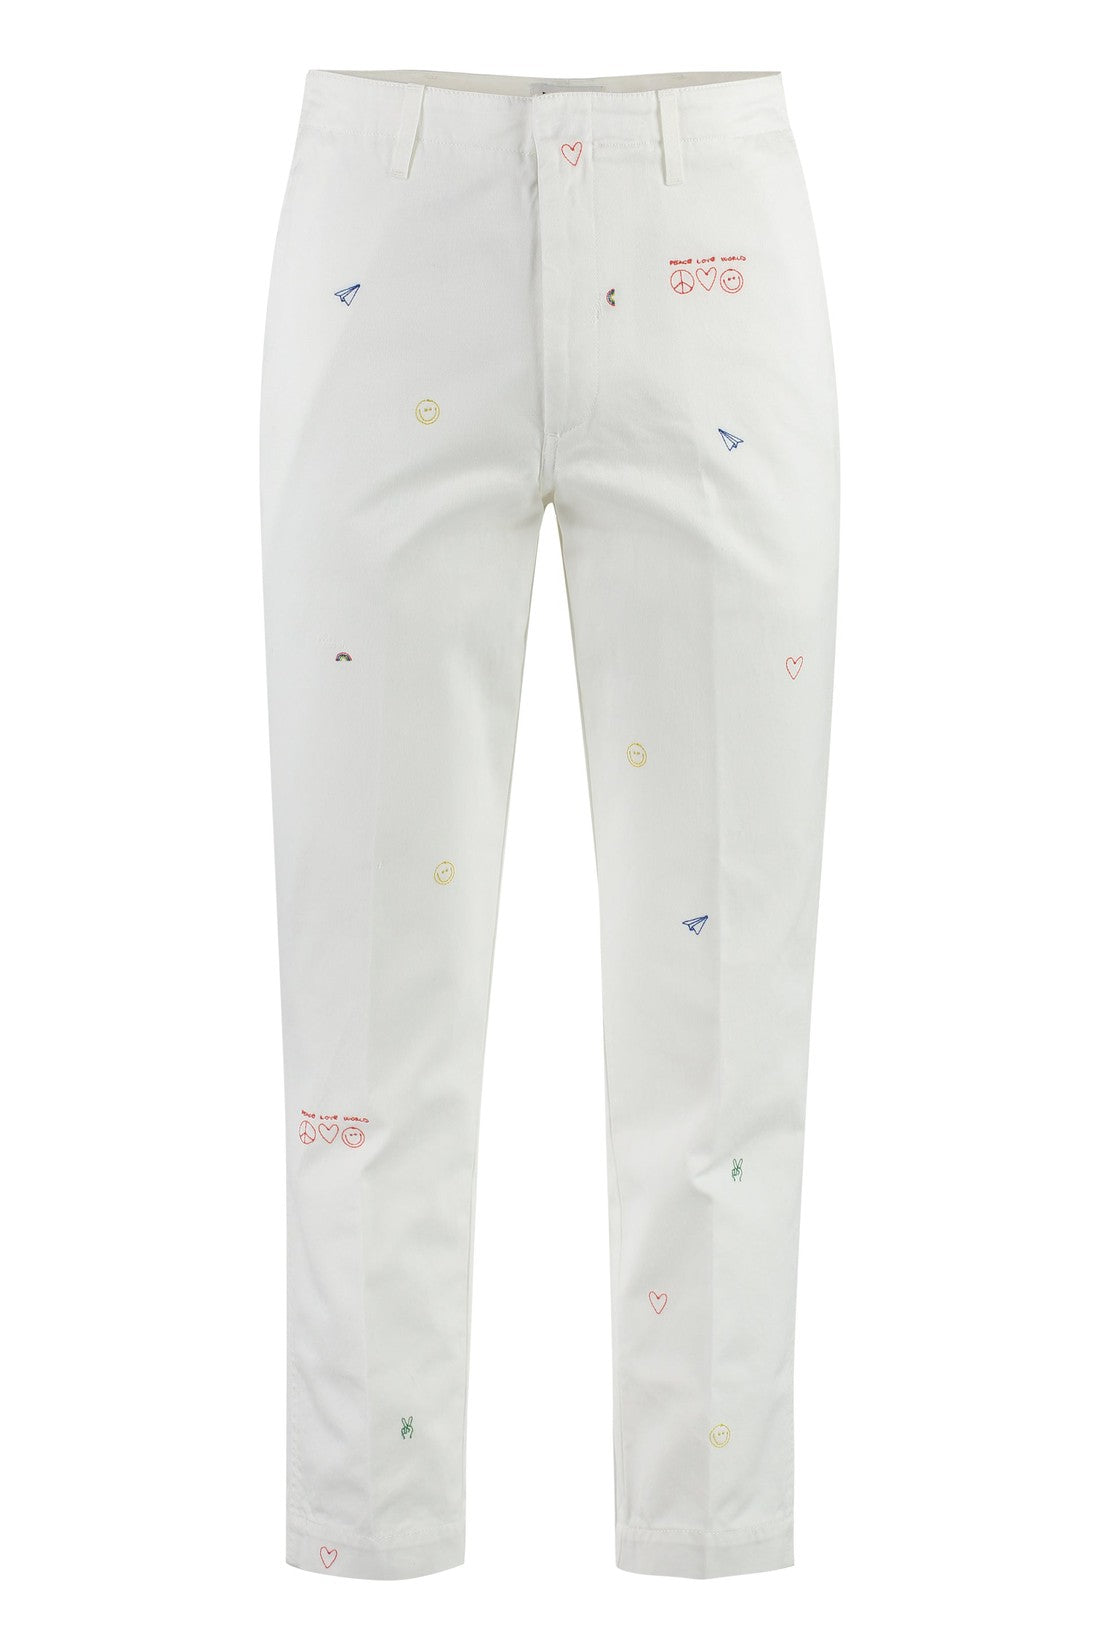 Cotton-Chino-trousers-Dondup-designer-outlet-archivist.jpg